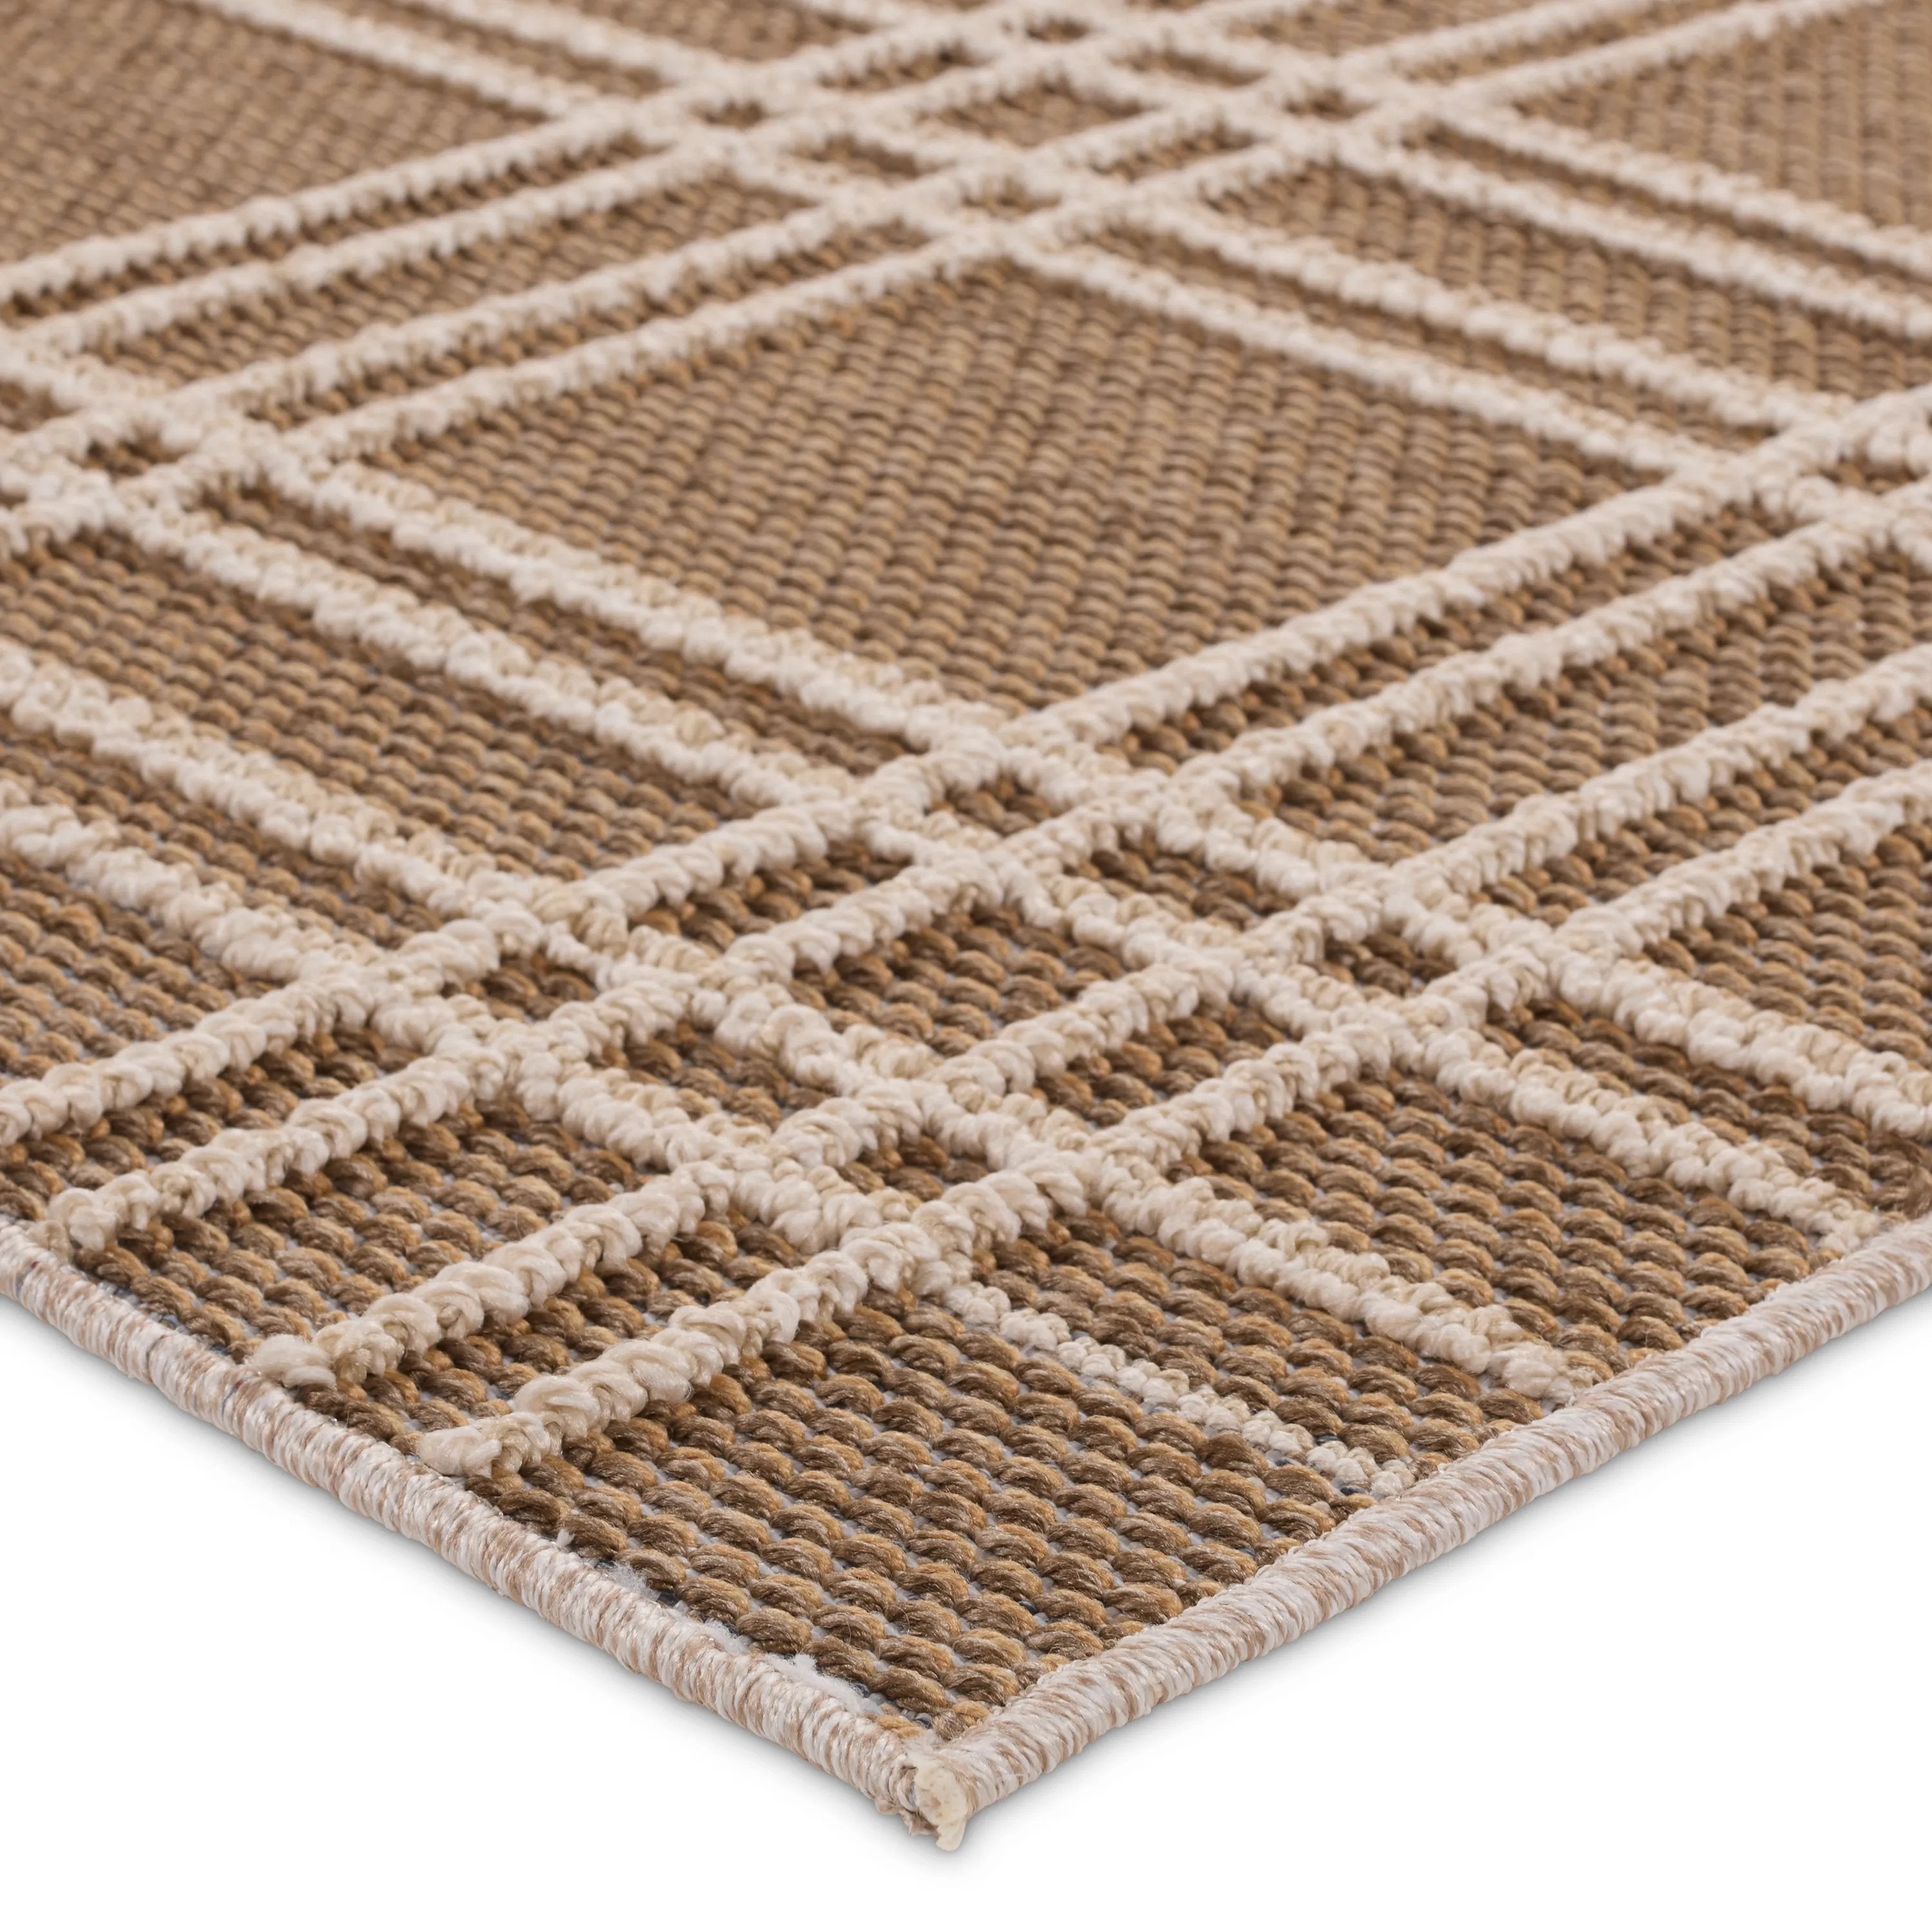 The indoor-outdoor Paradizo collection features durable, weather-resistant fibers that create a flatwoven, natural look. Emanating the colors and tone of grass fibers, the Barrett rug boasts a neutral, grounding palette. The textural grid design paired with the colorway of brown and cream highlight the easily styled nature of this accent piece. Amethyst Home provides interior design, new home construction design consulting, vintage area rugs, and lighting in the Portland metro area.